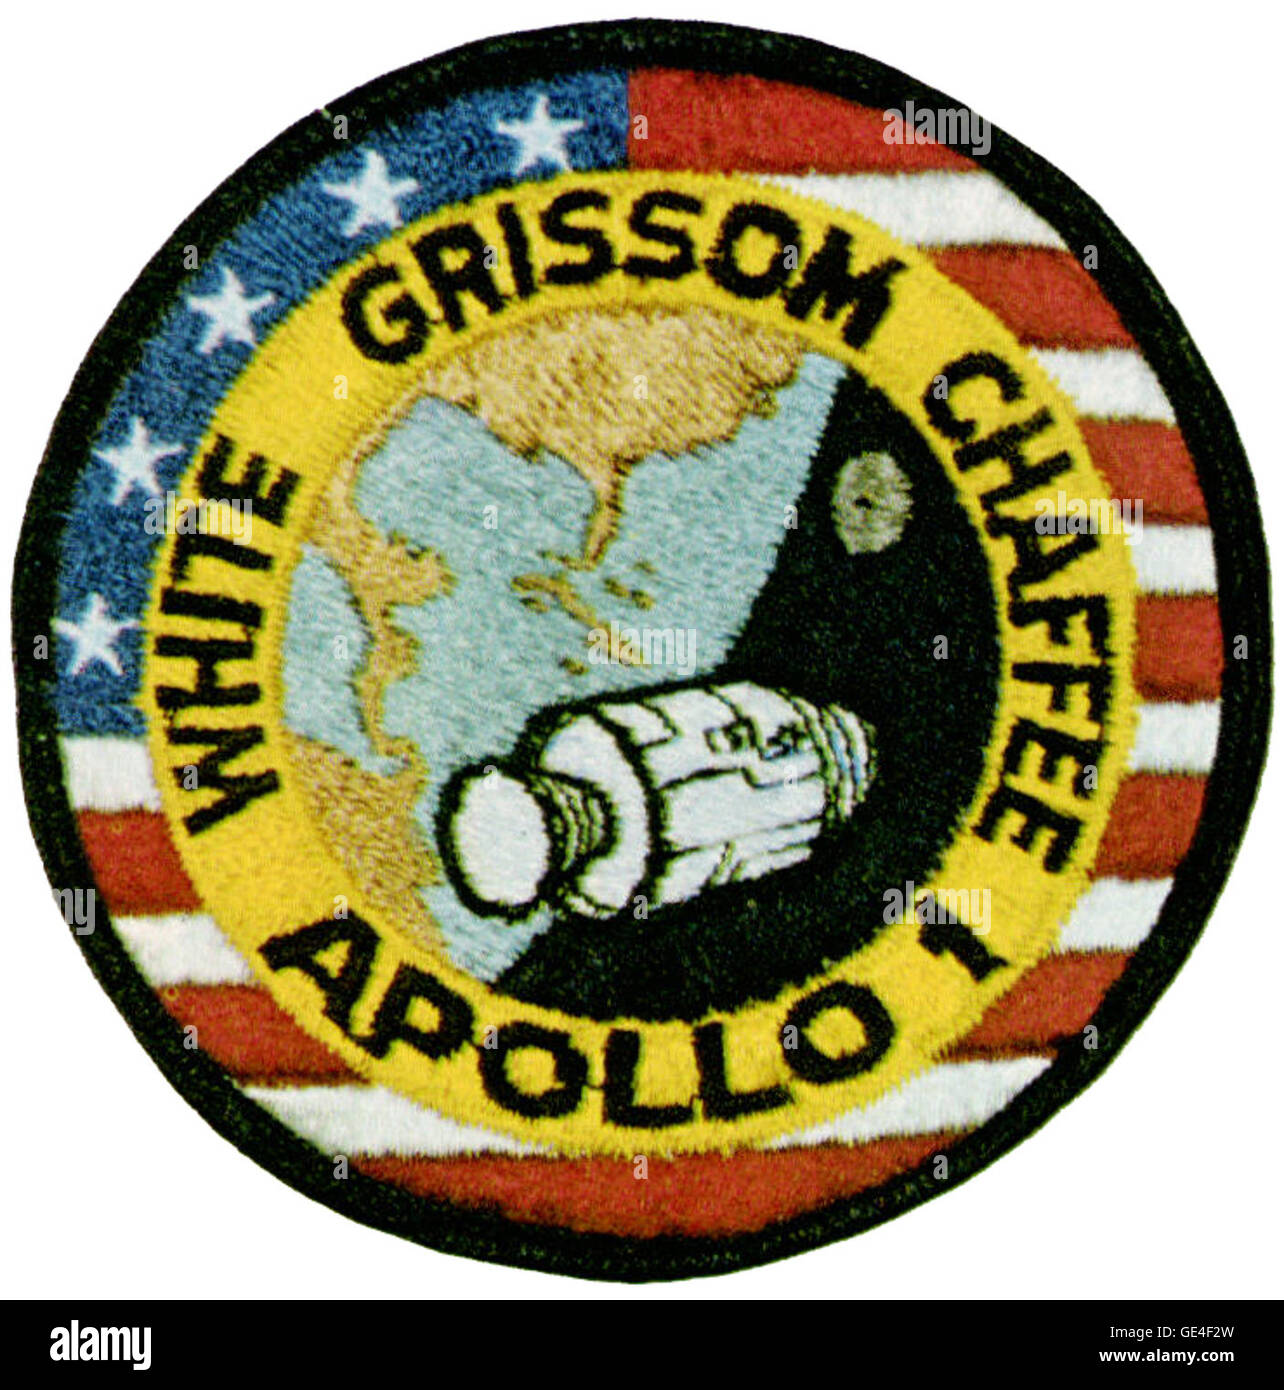 Astronauts- Virgil “Gus” Grissom, Edward White and Roger Chaffee On January 27, 1967 a fire swept through the cabin during a launch rehearsal killing astronauts Virgil “Gus” Girssom, Edward White and Roger Chaffee. The name Apollo 1 was given to the mission in the spring of 1967 in memory of the astronauts who lost their lives.  www.nasa.gov/mission pages/apollo/missions/apollo1.html#.... ( http://www.nasa.gov/mission pages/apollo/missions/apollo1.html#.VAiHchCa-So )  Date: January 27, 1967 Stock Photo